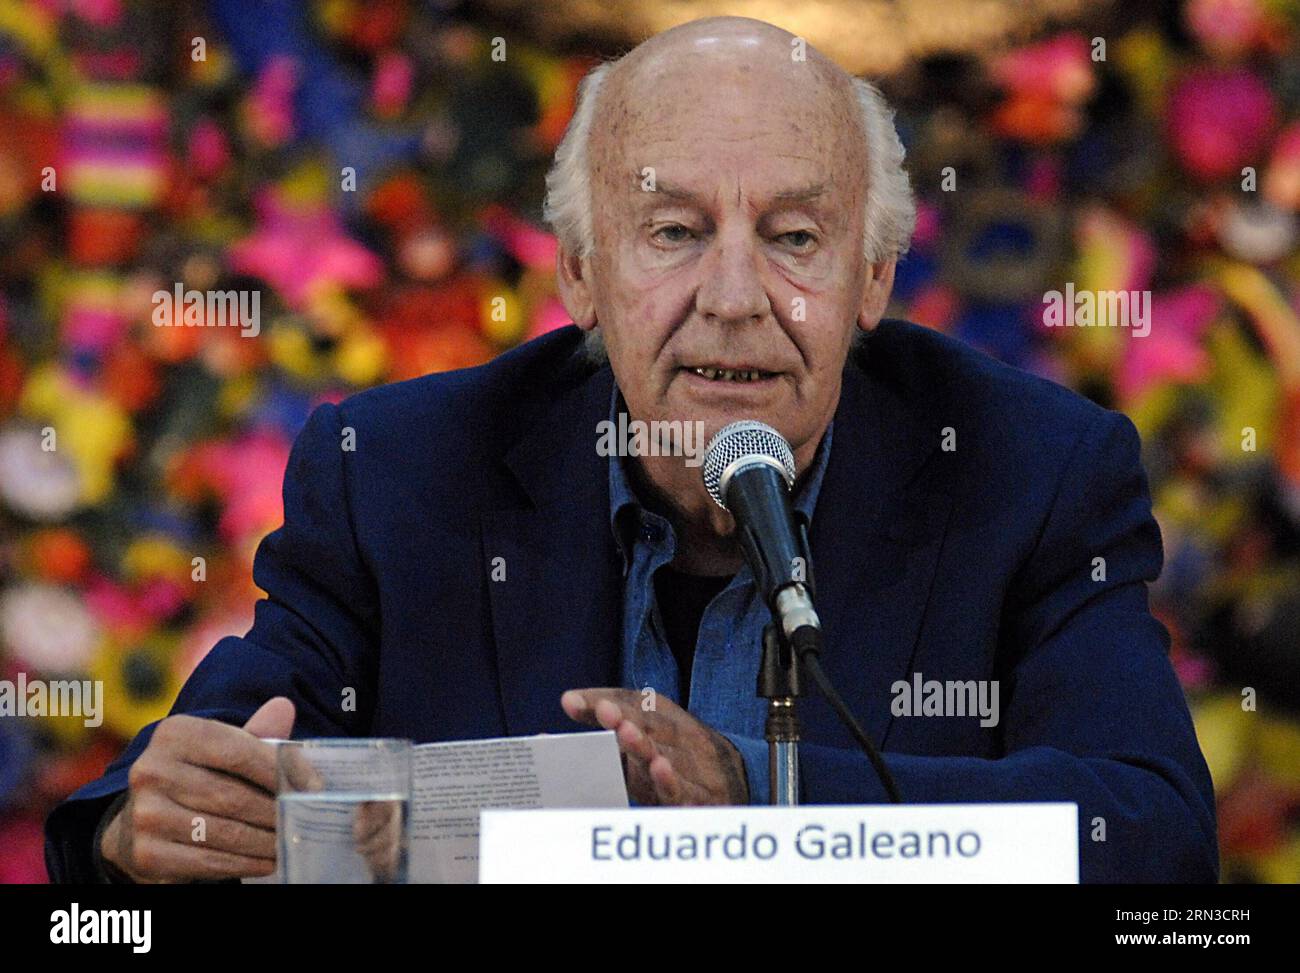 (150413) -- MONTEVIDEO, April 13, 2015 -- Photo taken on Jan. 16, 2012 shows Uruguayan writer Eduardo Galeano participating in a ceremony in Havana, the capital of Cuba. Uruguayan writer and journalist Eduardo Galeano, best known for his work Open Veins of Latin America, died Monday at the age of 74. ) (jp) URUGUAY-MONTEVIDEO-CULTURE-EDUARDO GALEANO JOAQUINxHERNANDEZ PUBLICATIONxNOTxINxCHN   Montevideo April 13 2015 Photo Taken ON Jan 16 2012 Shows Uruguayan Writer Eduardo Galeano participating in a Ceremony in Havana The Capital of Cuba Uruguayan Writer and Journalist Eduardo Galeano Best kno Stock Photo